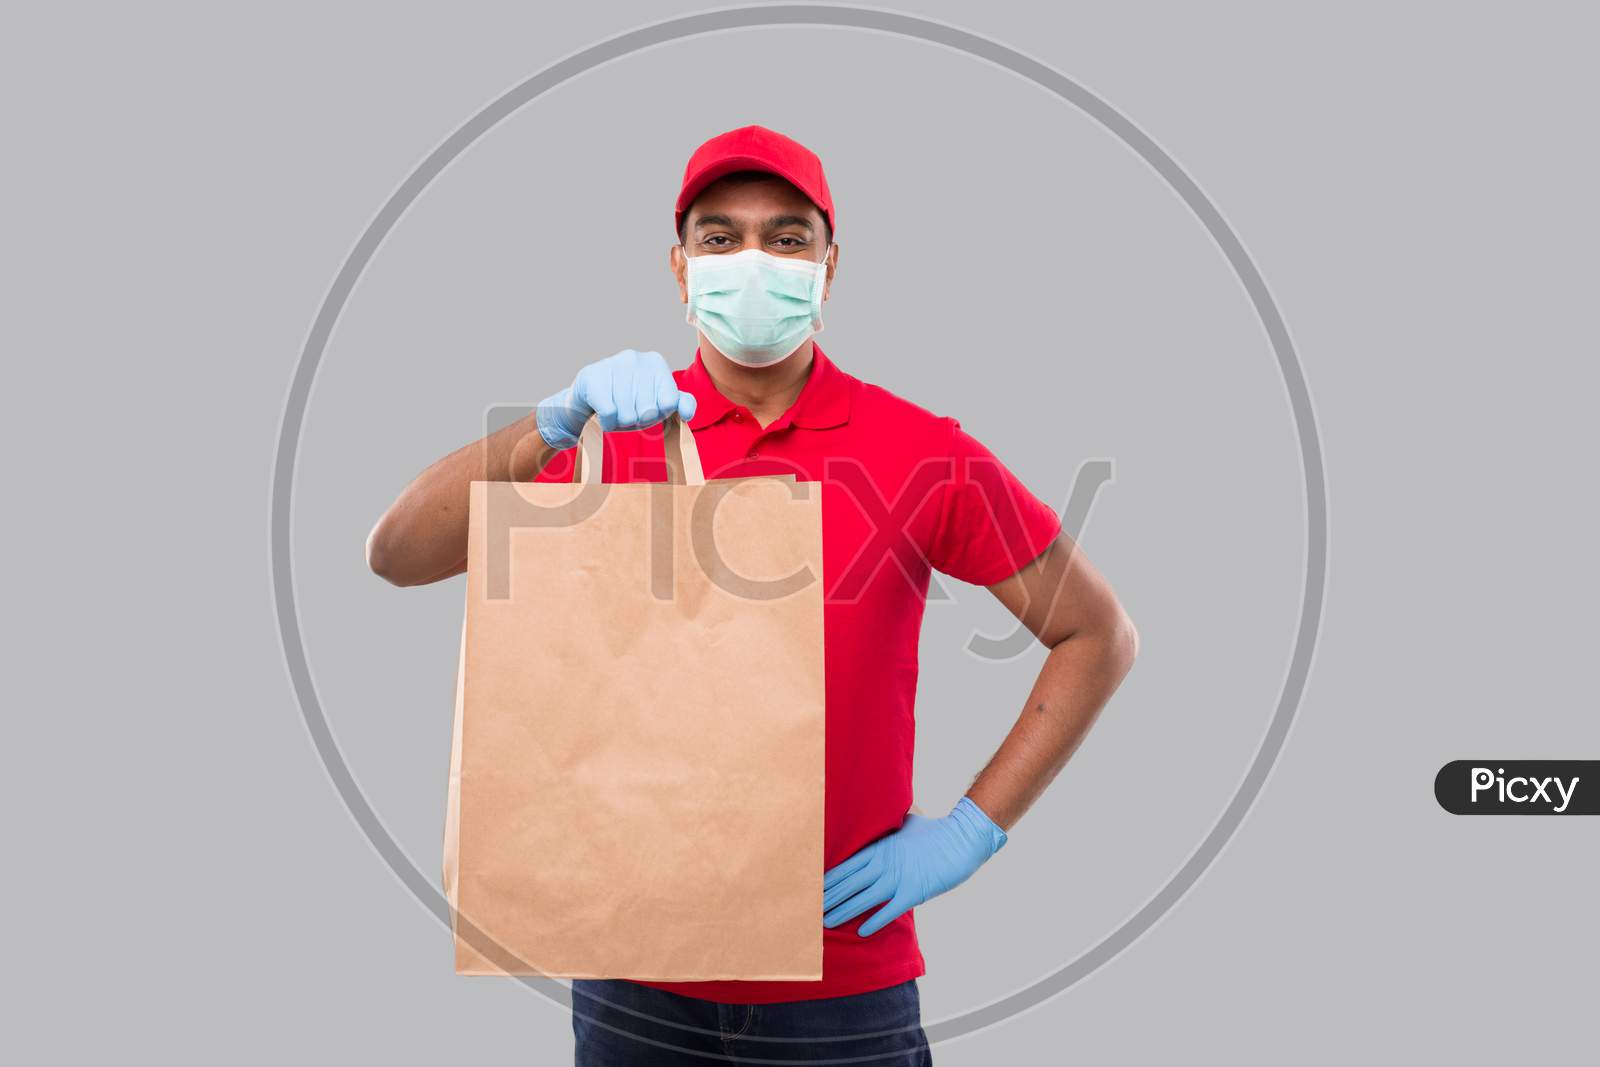 Delivery Man With Paper Bag In Hands Wearing Medical Mask And Gloves Isolated. Red Uniform Indian Delivery Boy. Home Food Delivery. Paper Bag